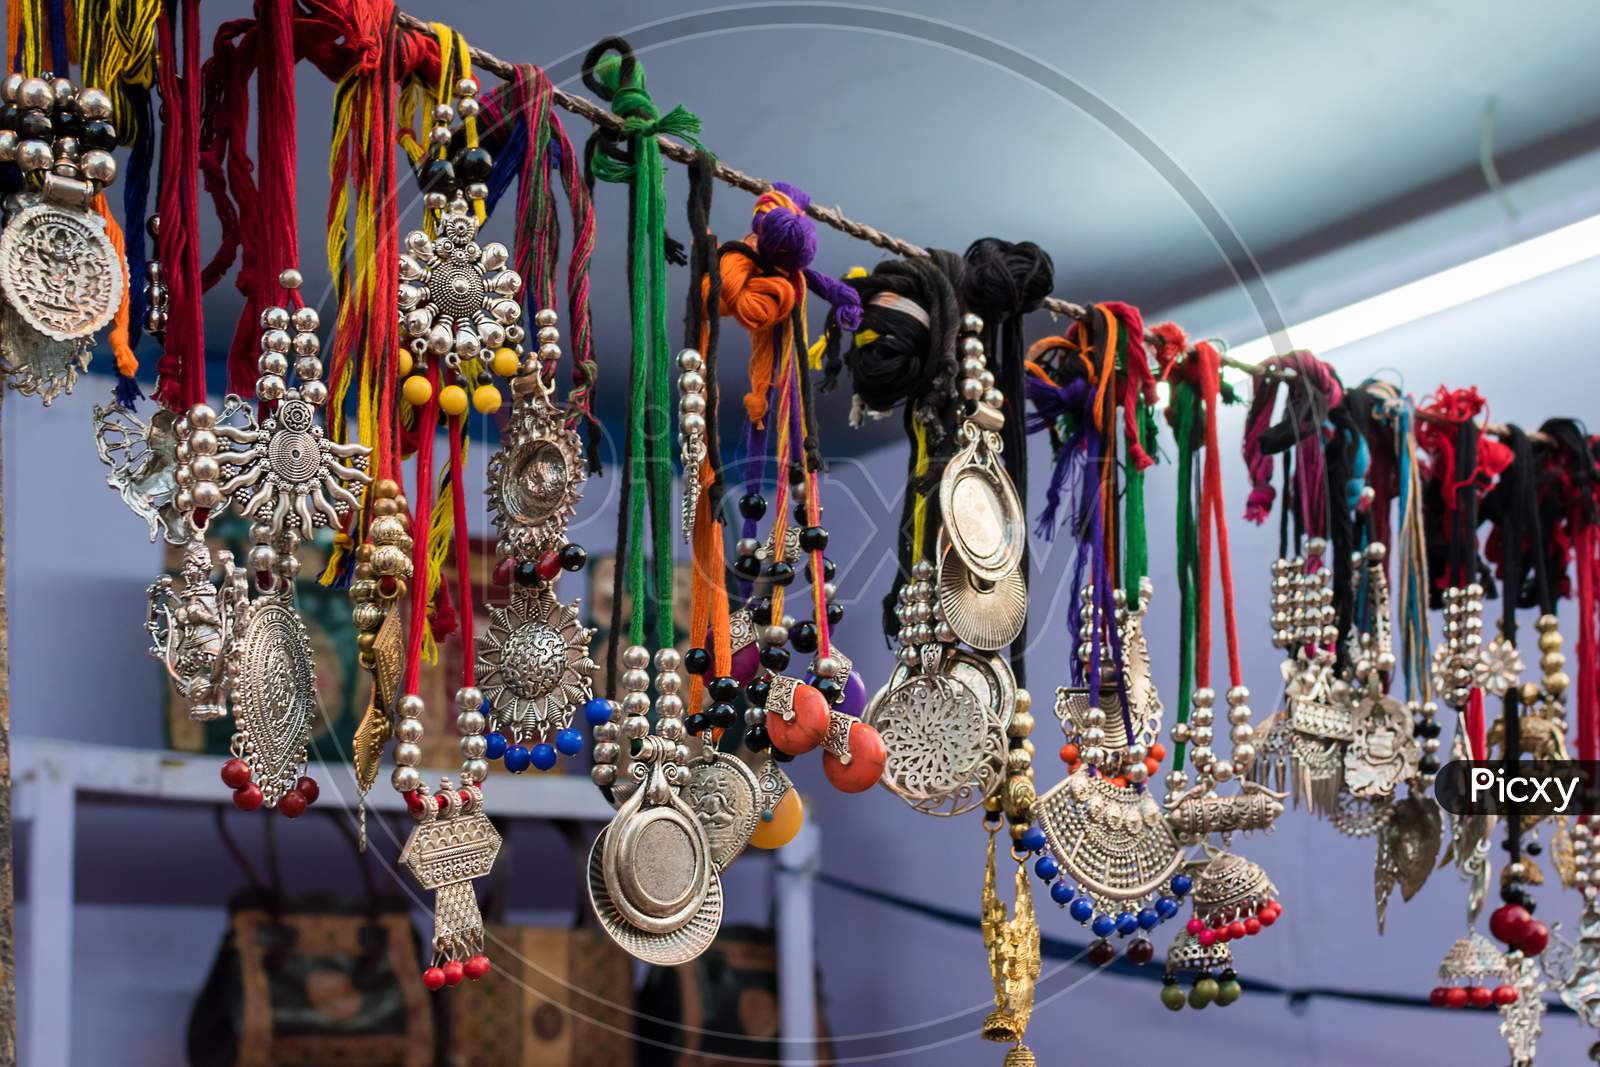 Picture Of Antique Handmade Indian Gemstone Necklace Is Displayed In A Street Shop For Sale. Indian Handicraft And Art